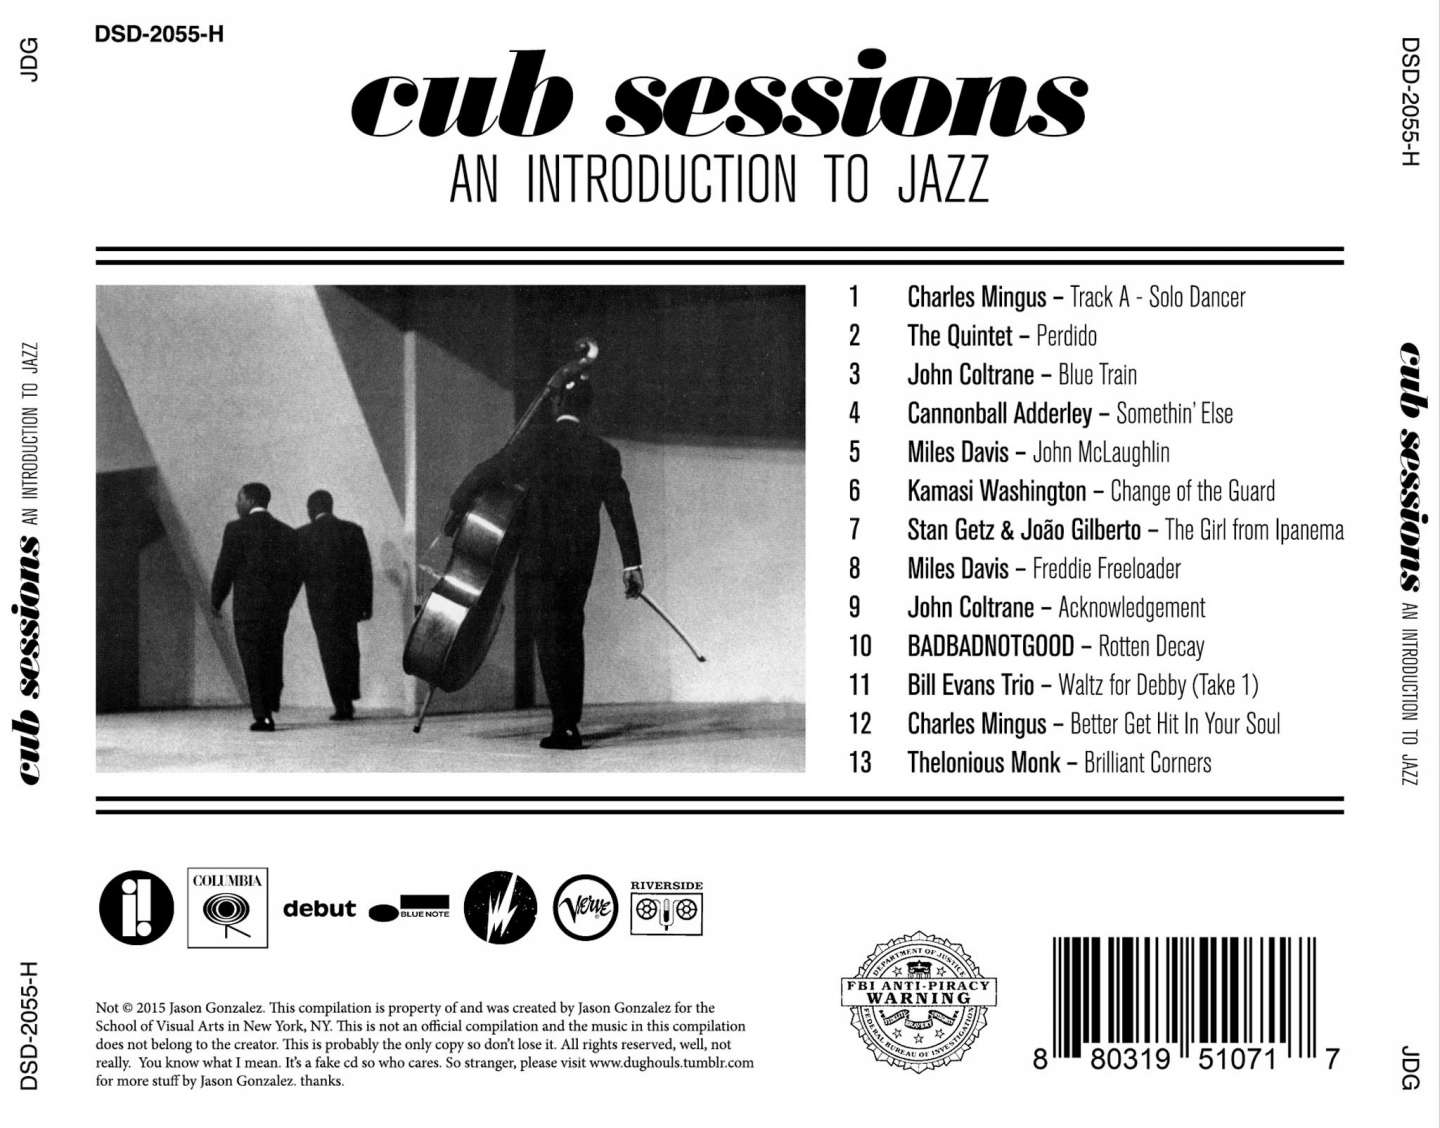 An Introduction to Jazz